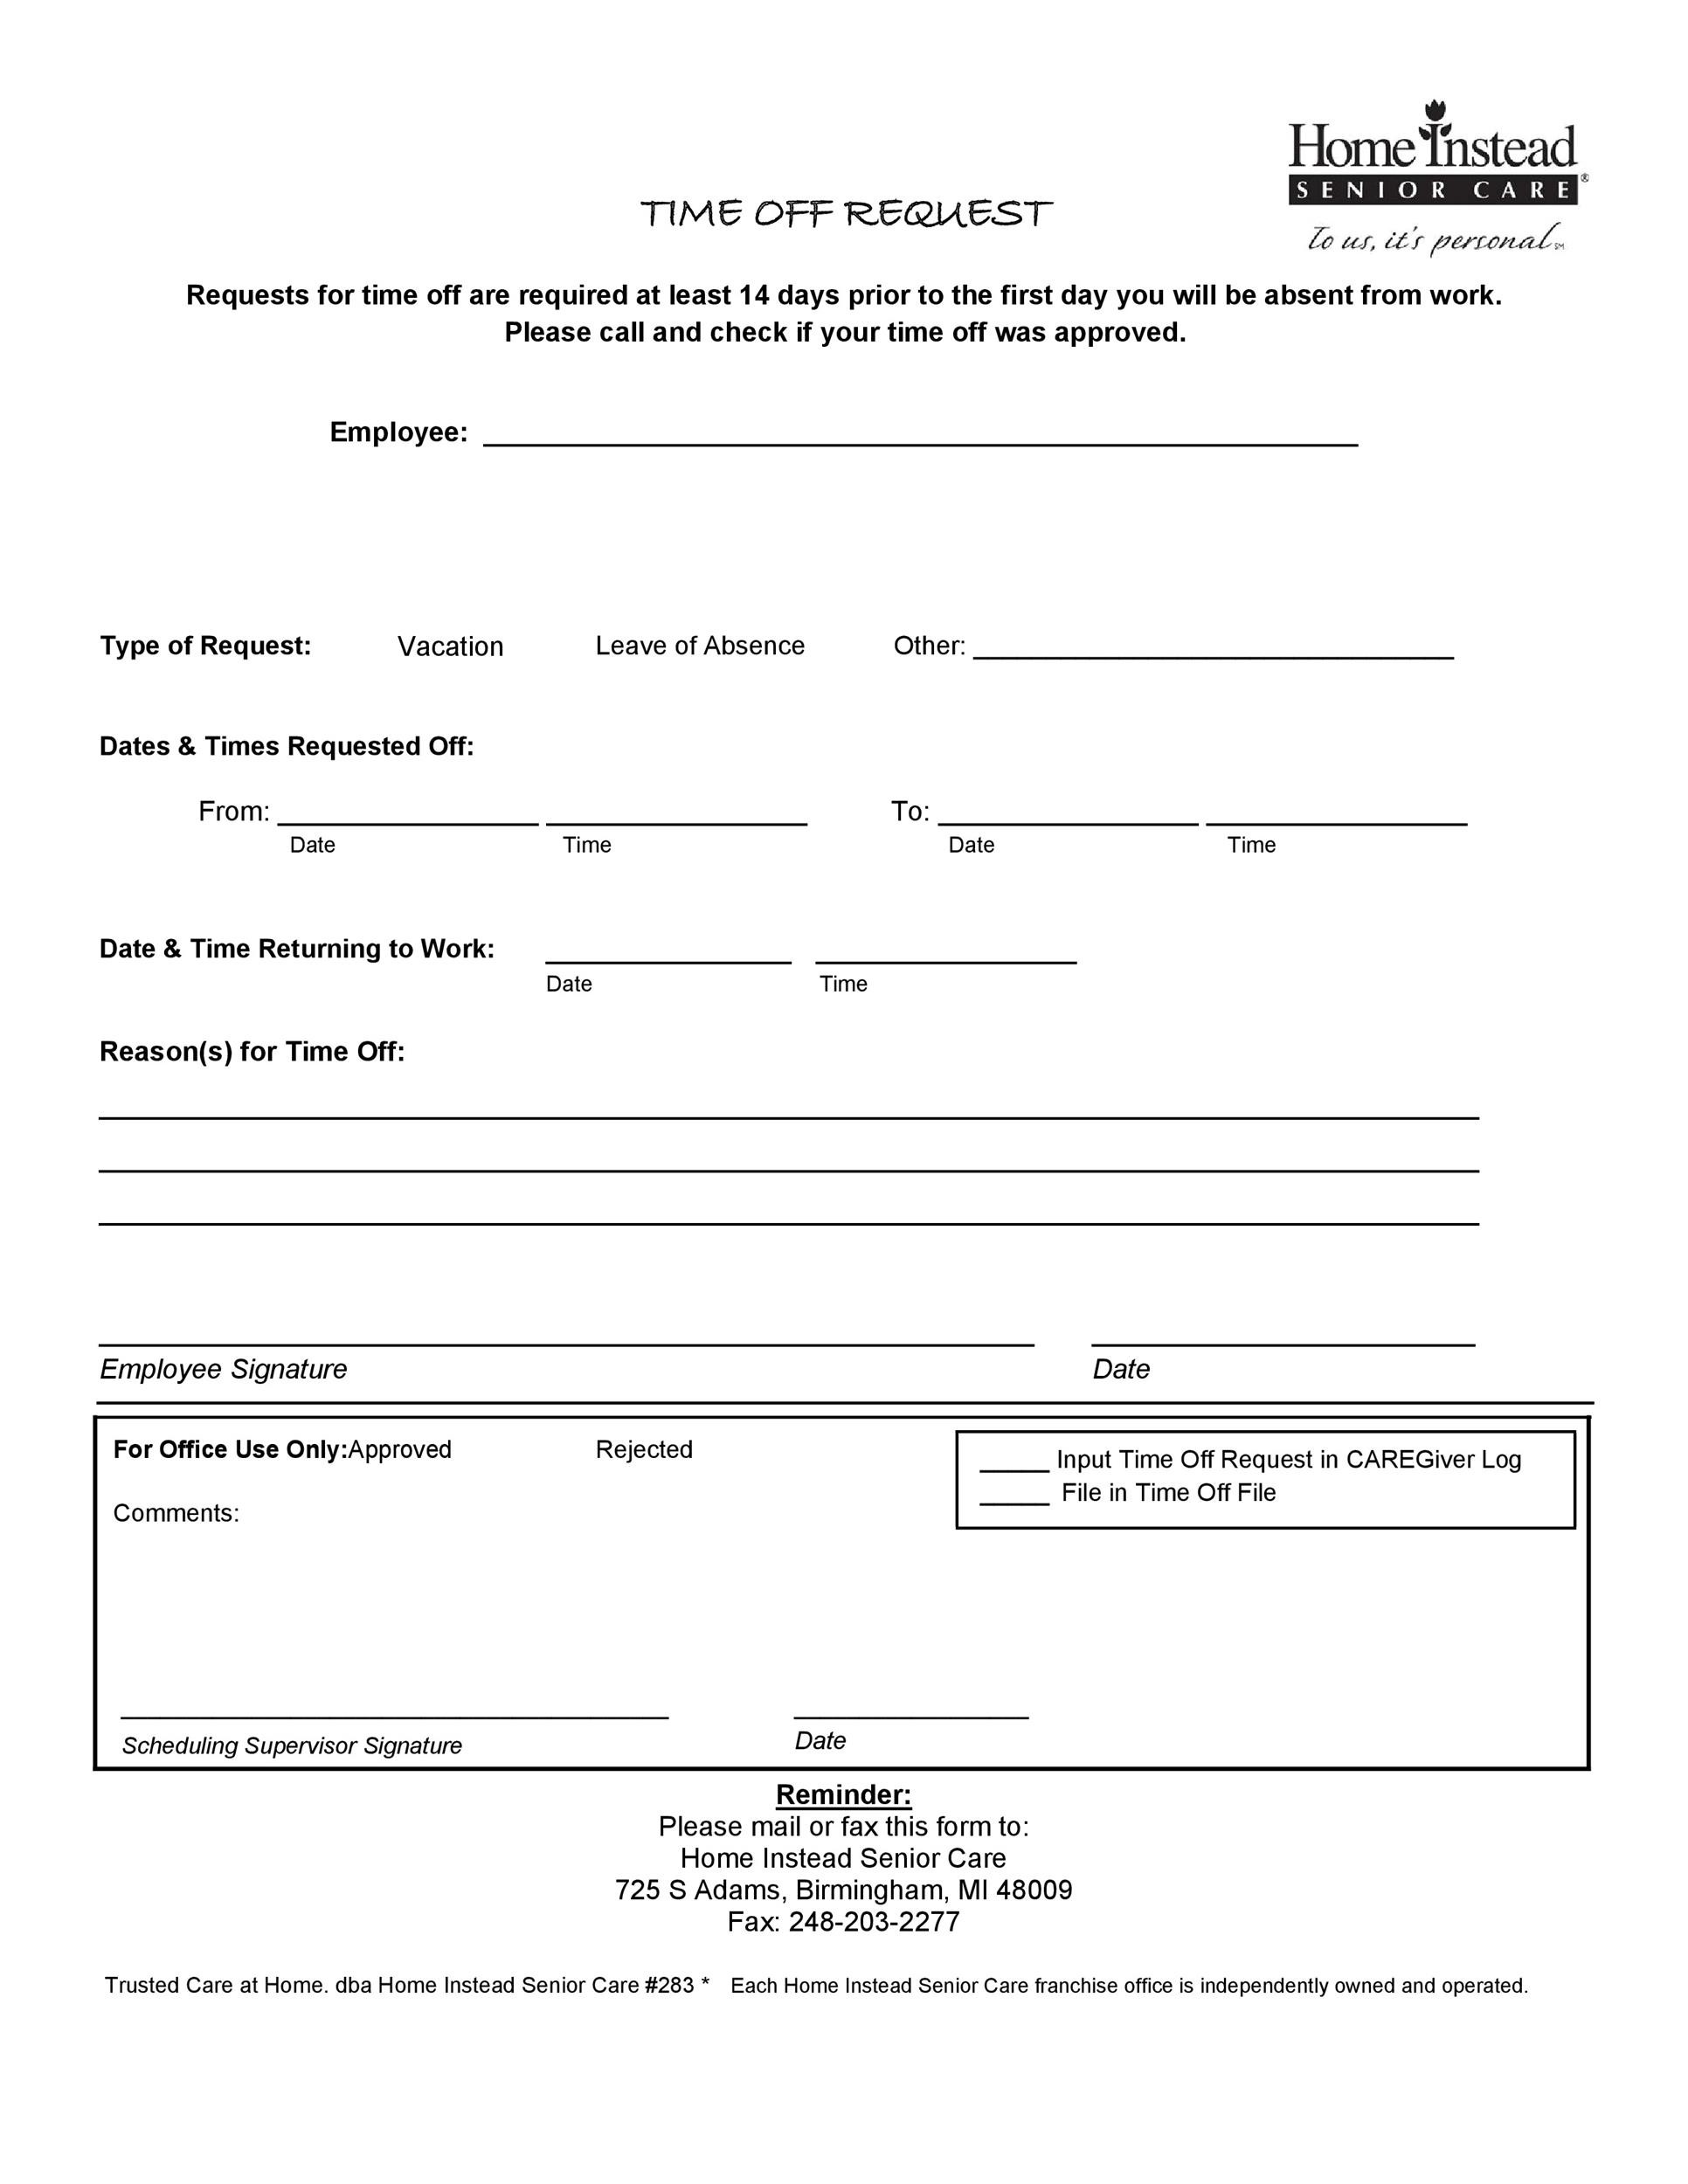 Free time off request form template 23